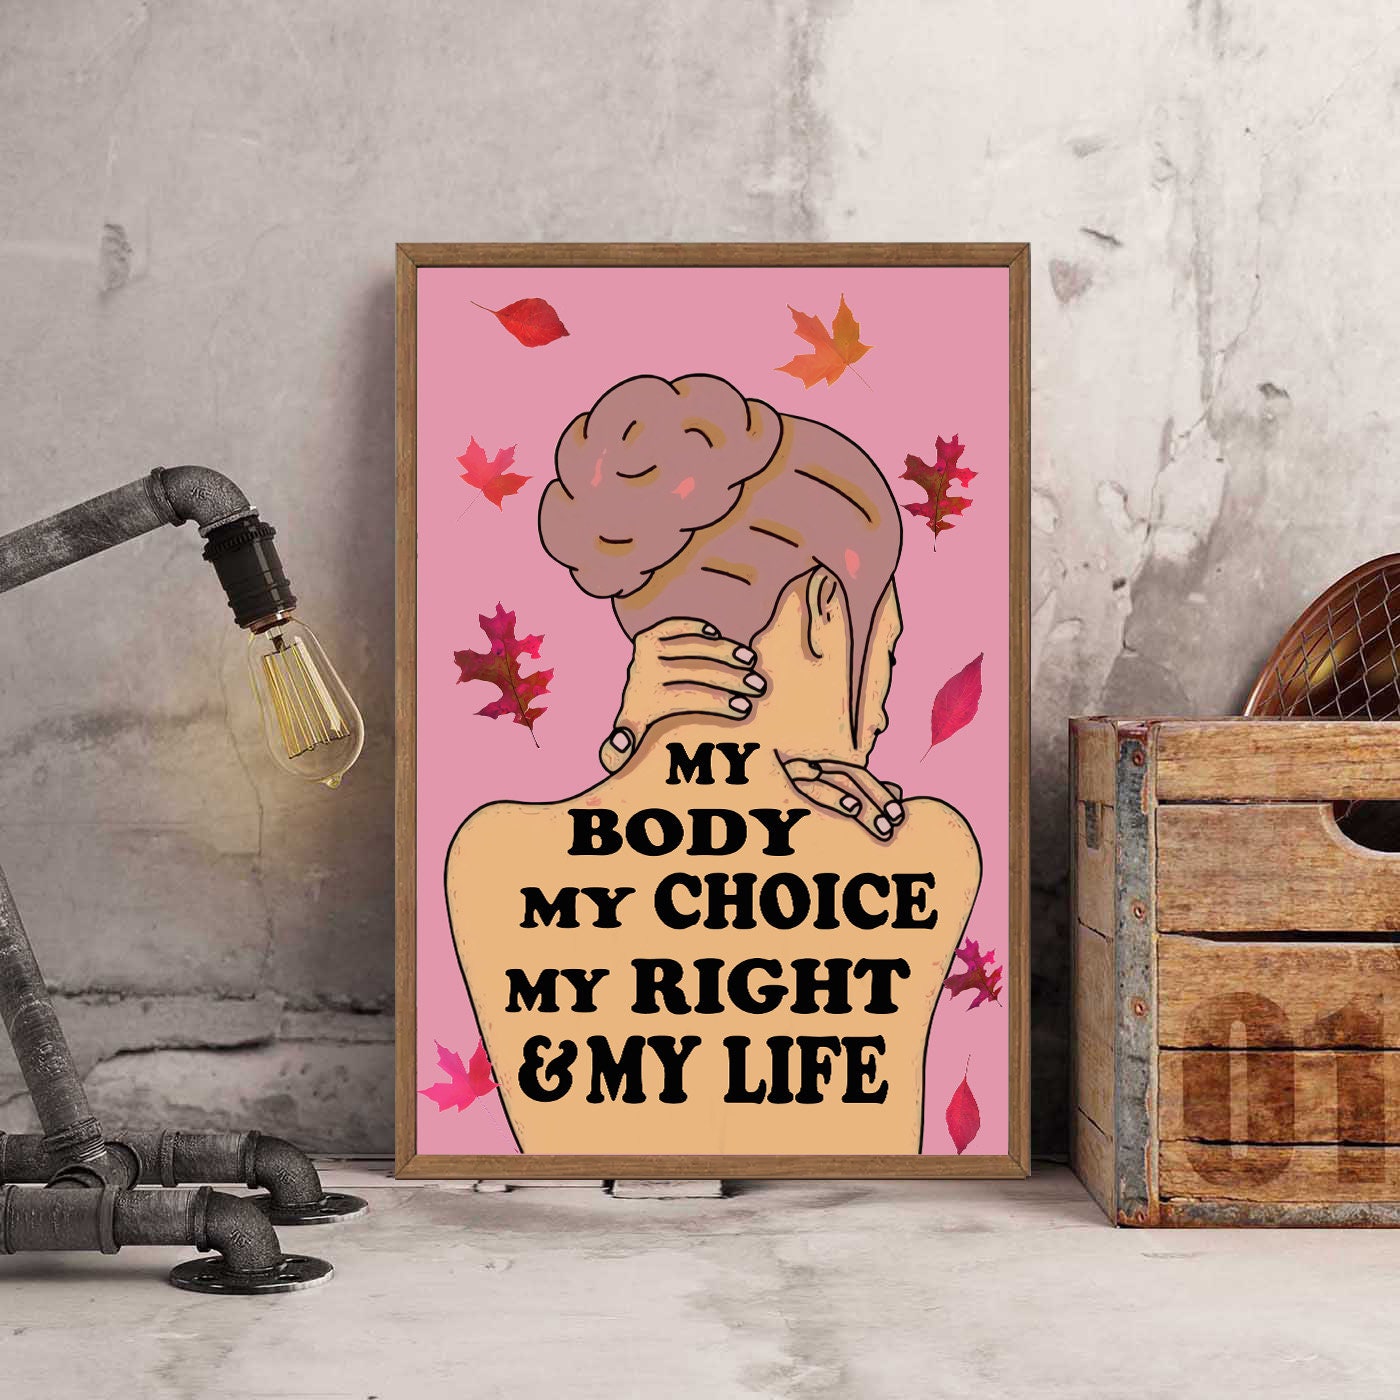 My Body My Choice Poster, Women Lover Gift, Empowerment Wall Art, Feminist Poster, Pro Choice Poster, Women's Rights Print M306A3